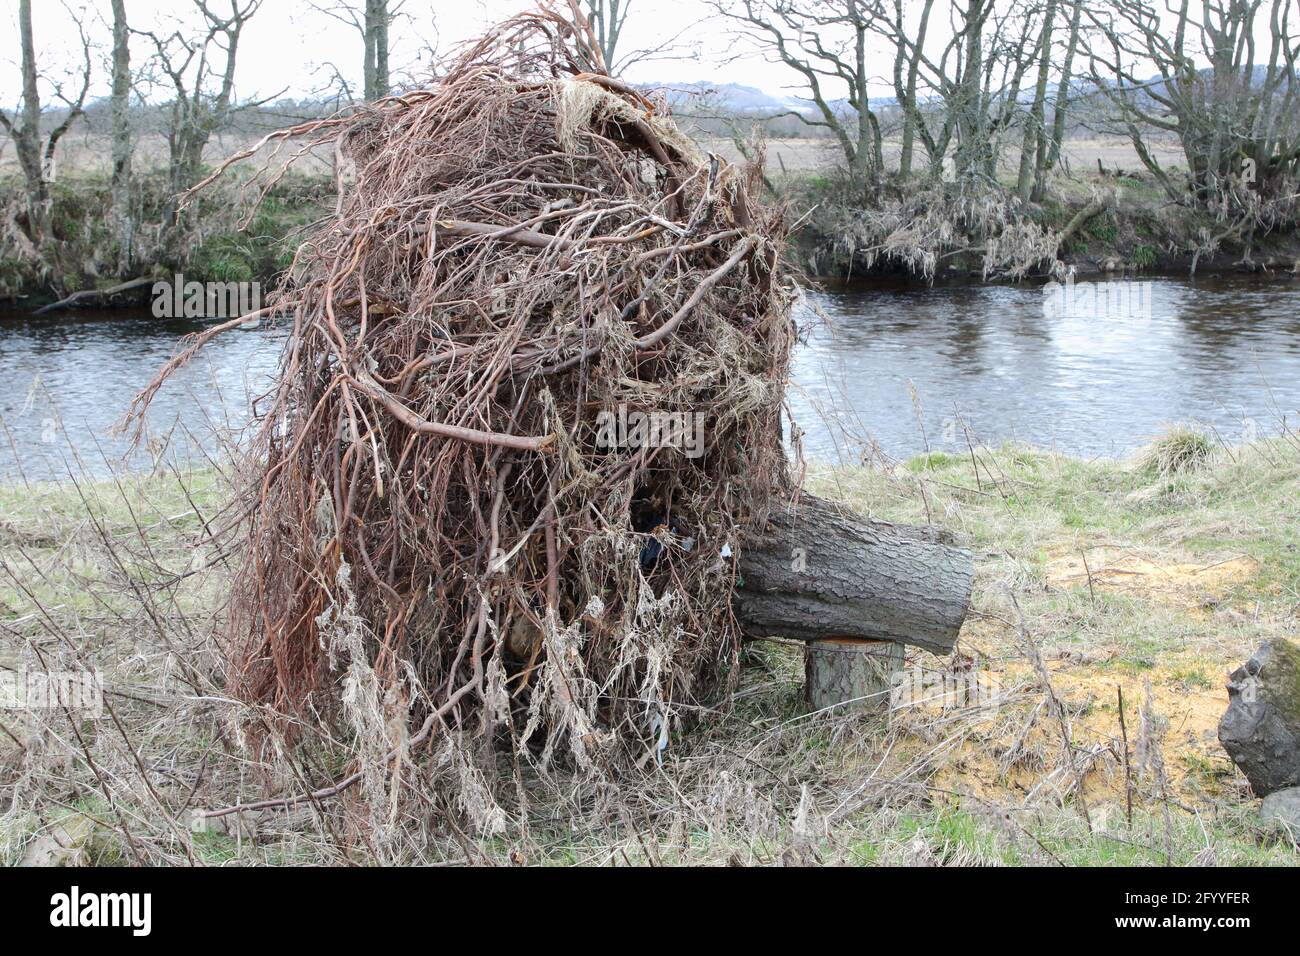 Exposed rootball,of tree, left on river bank, having trunk cut off, the roots are intangles with the soil or mud removed, most likely from flooding. Stock Photo